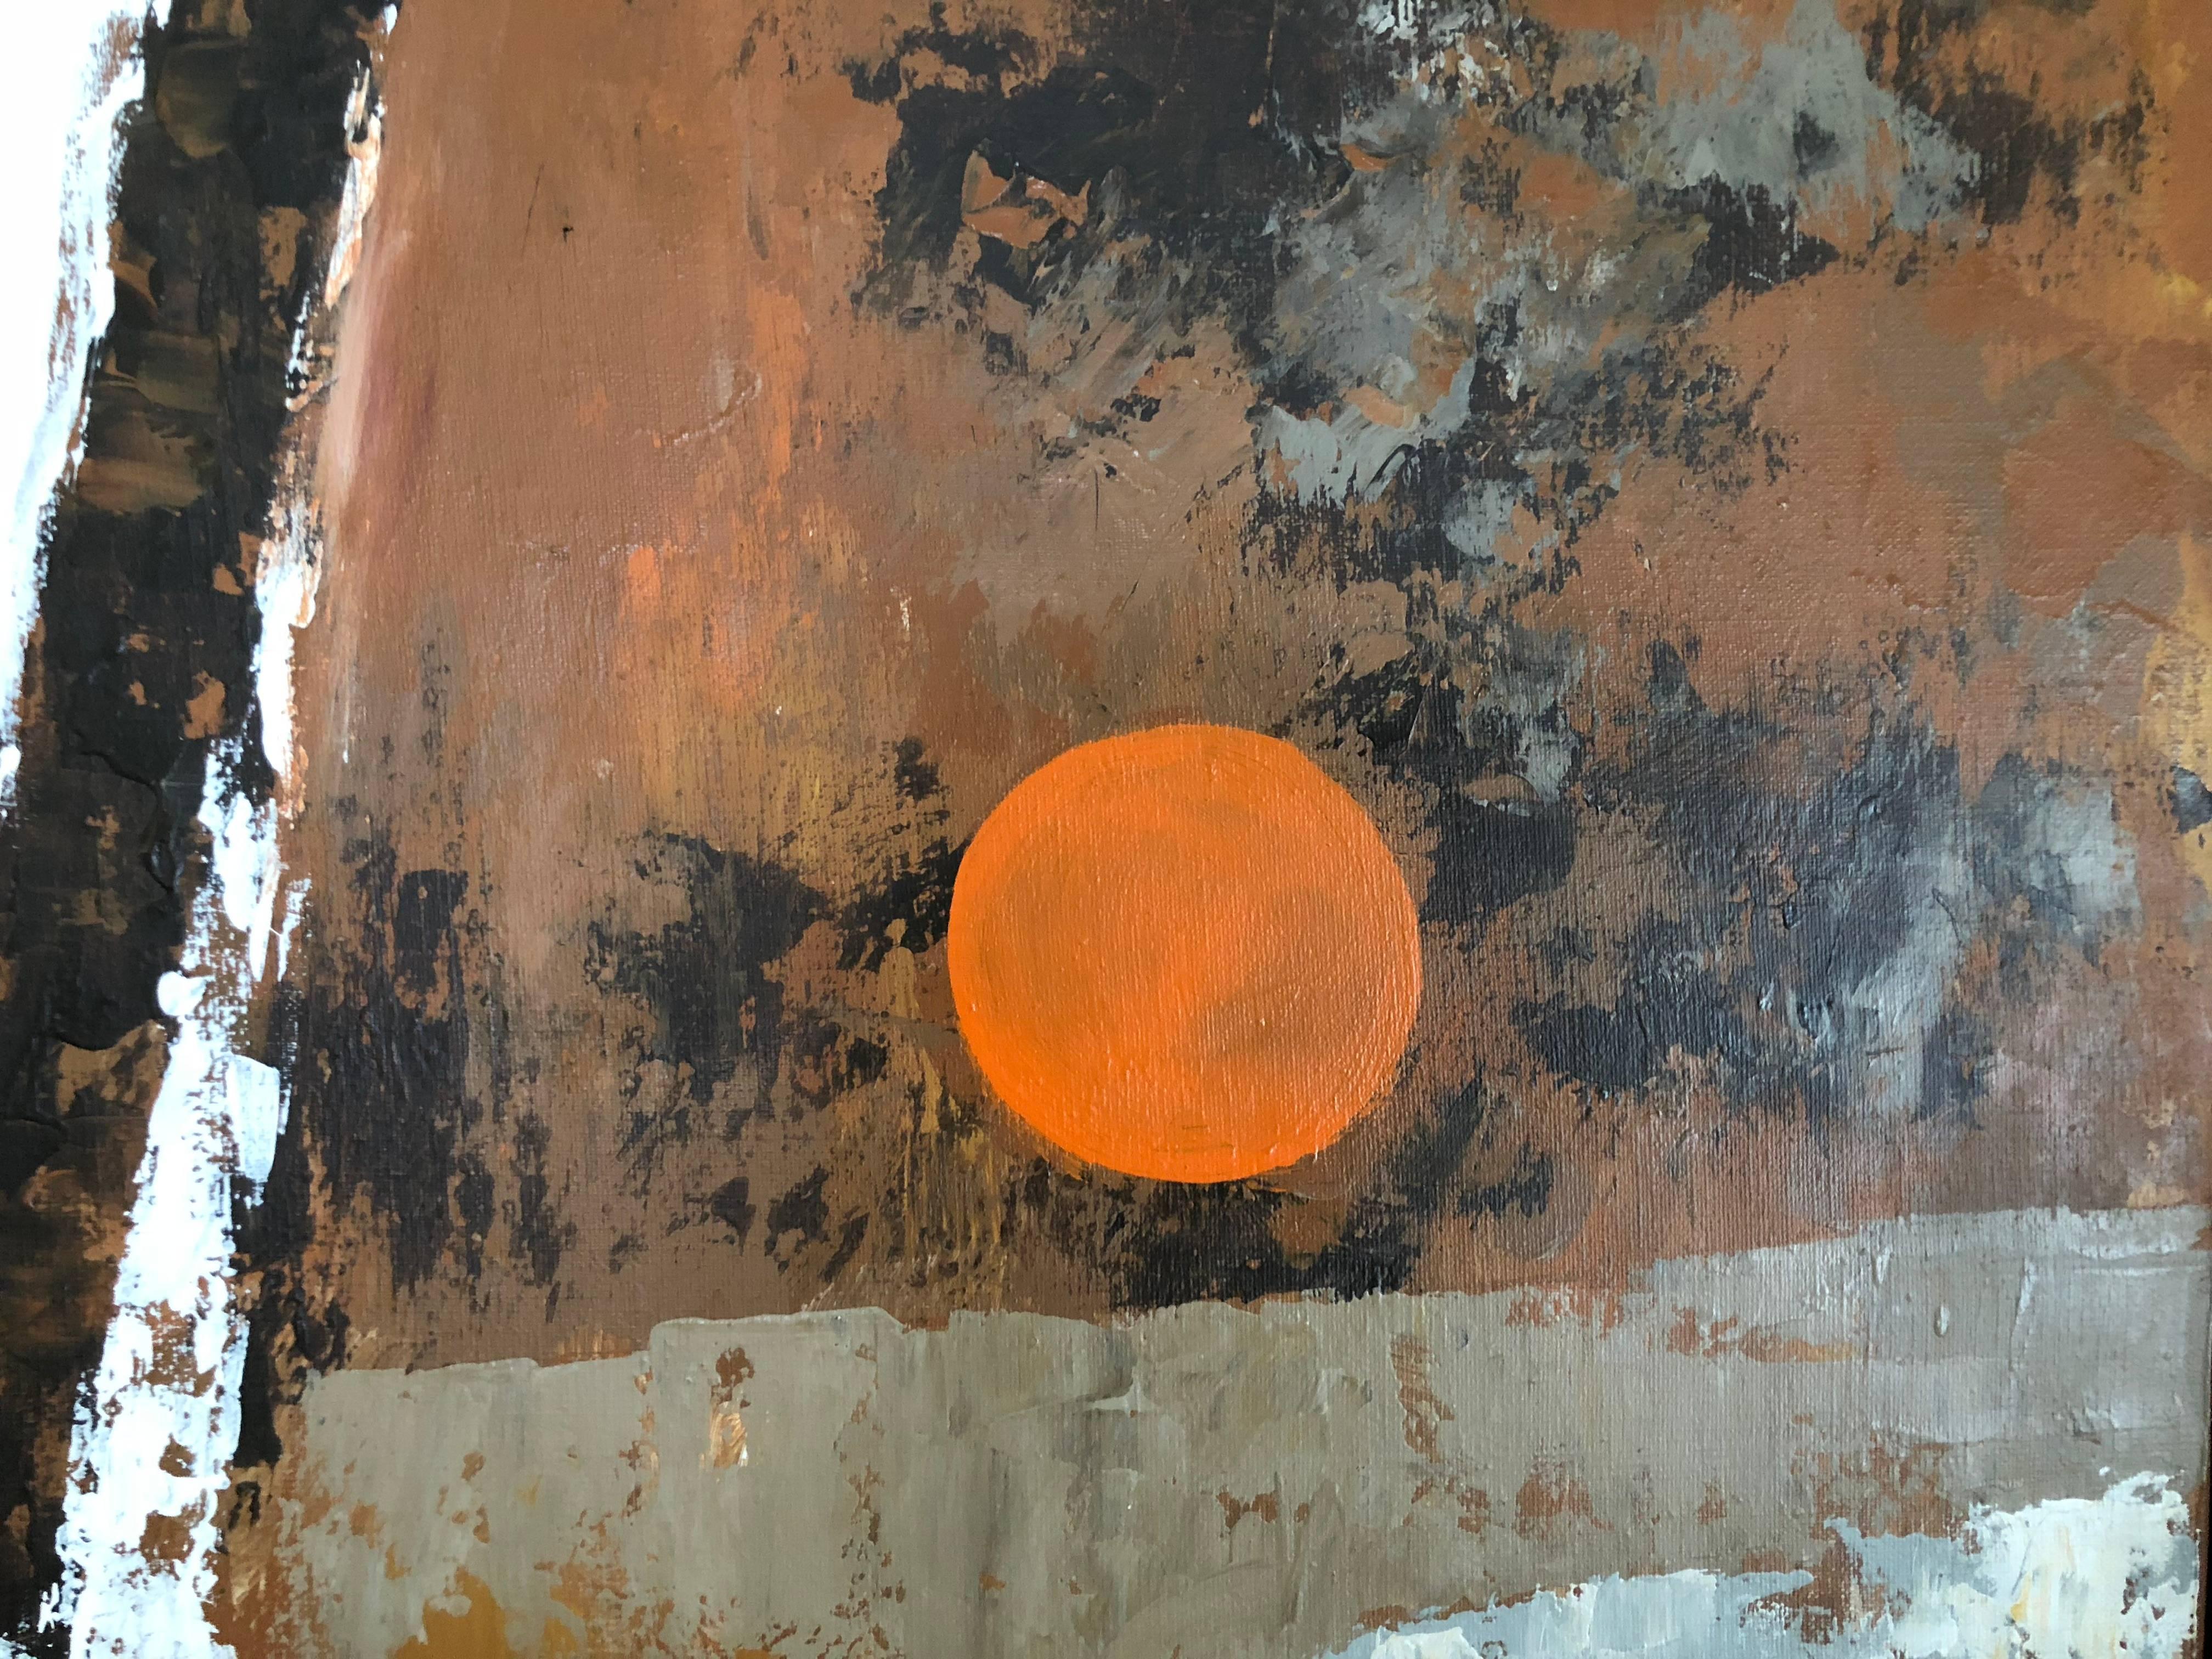 This oil painting features an orange circle as the focal point surrounded by structural lines and grids rendered in expressive white and browns strokes. The piece is signed in the lower left corner, 